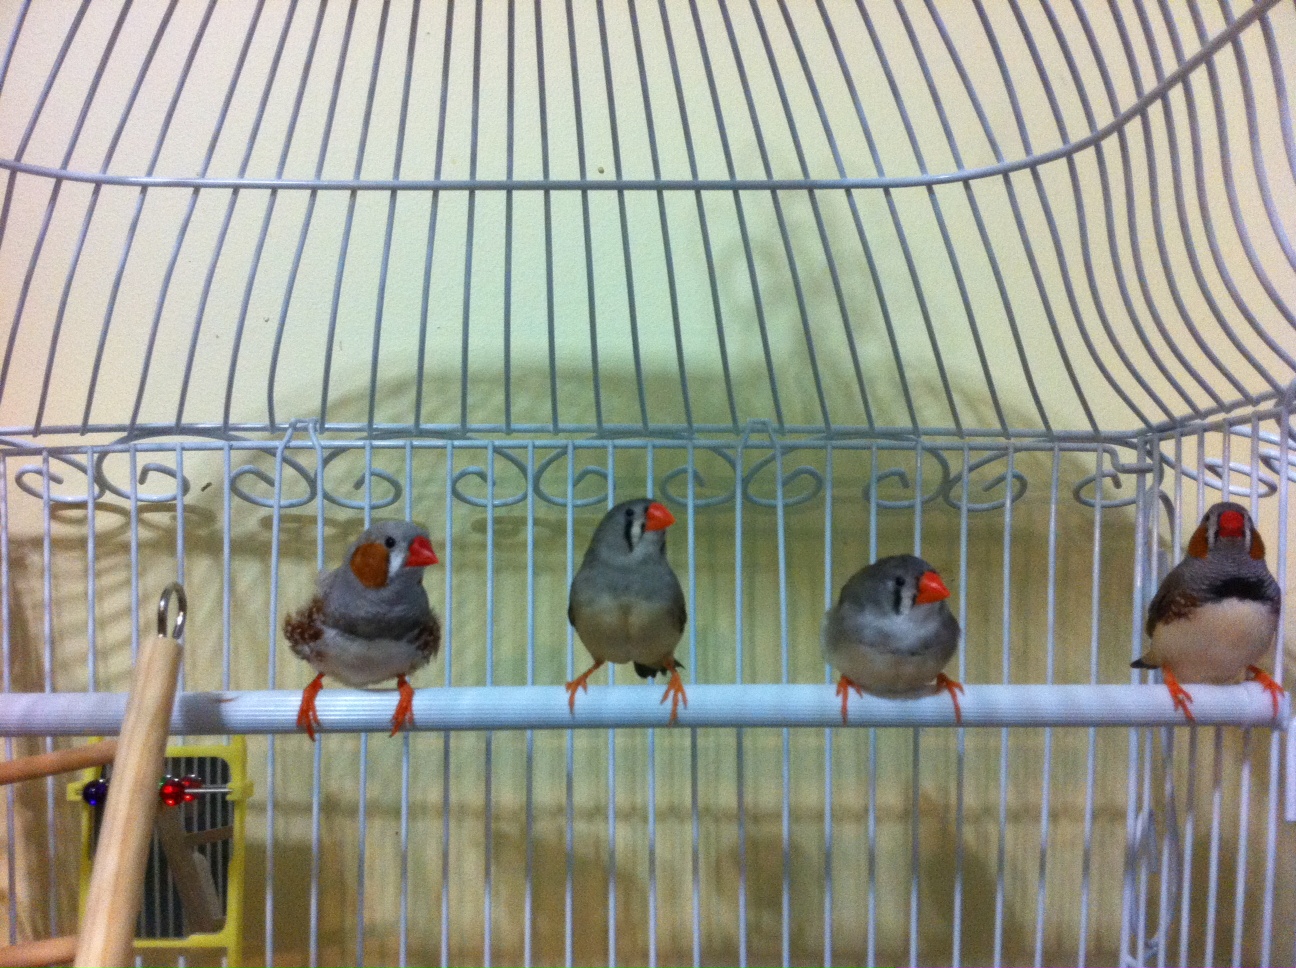 What does it mean when a male zebra finch fights with a female zebra finch?